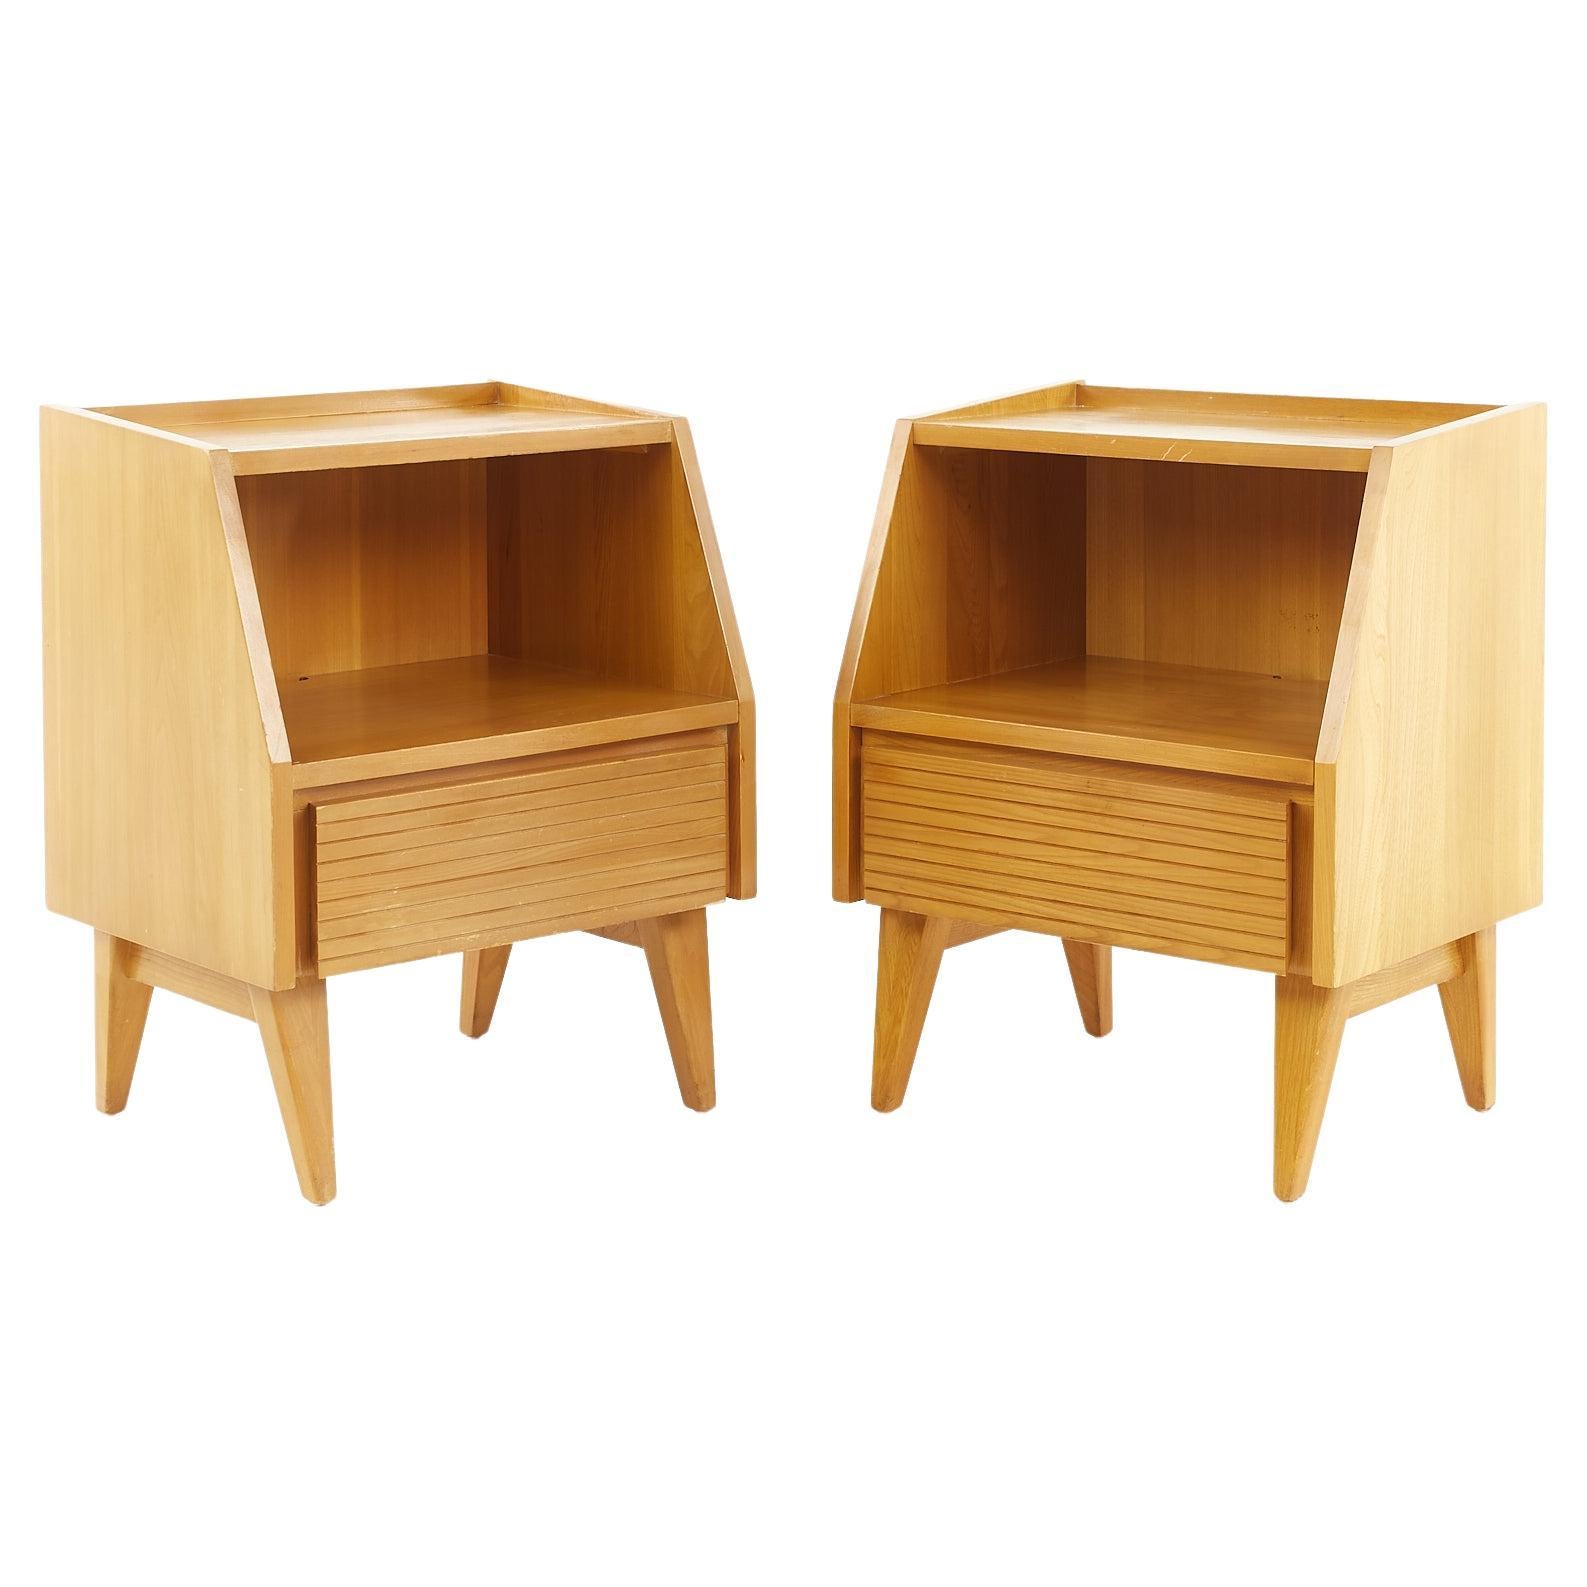 Conant Ball Mid Century Maple Nightstands, A Pair